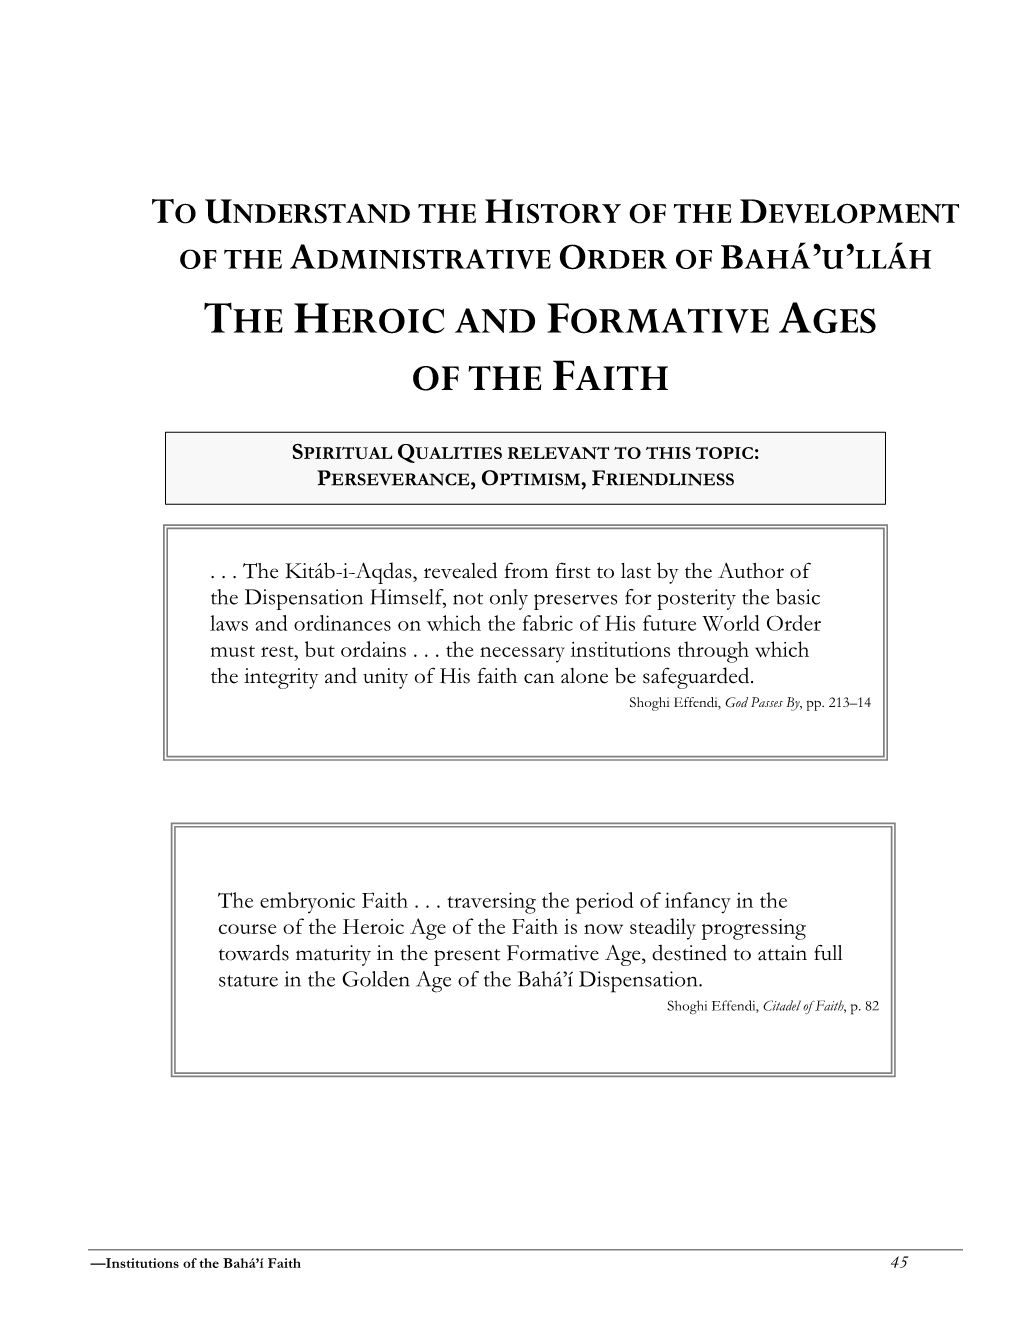 Topic:The Heroic and Formative Ages of the Faith